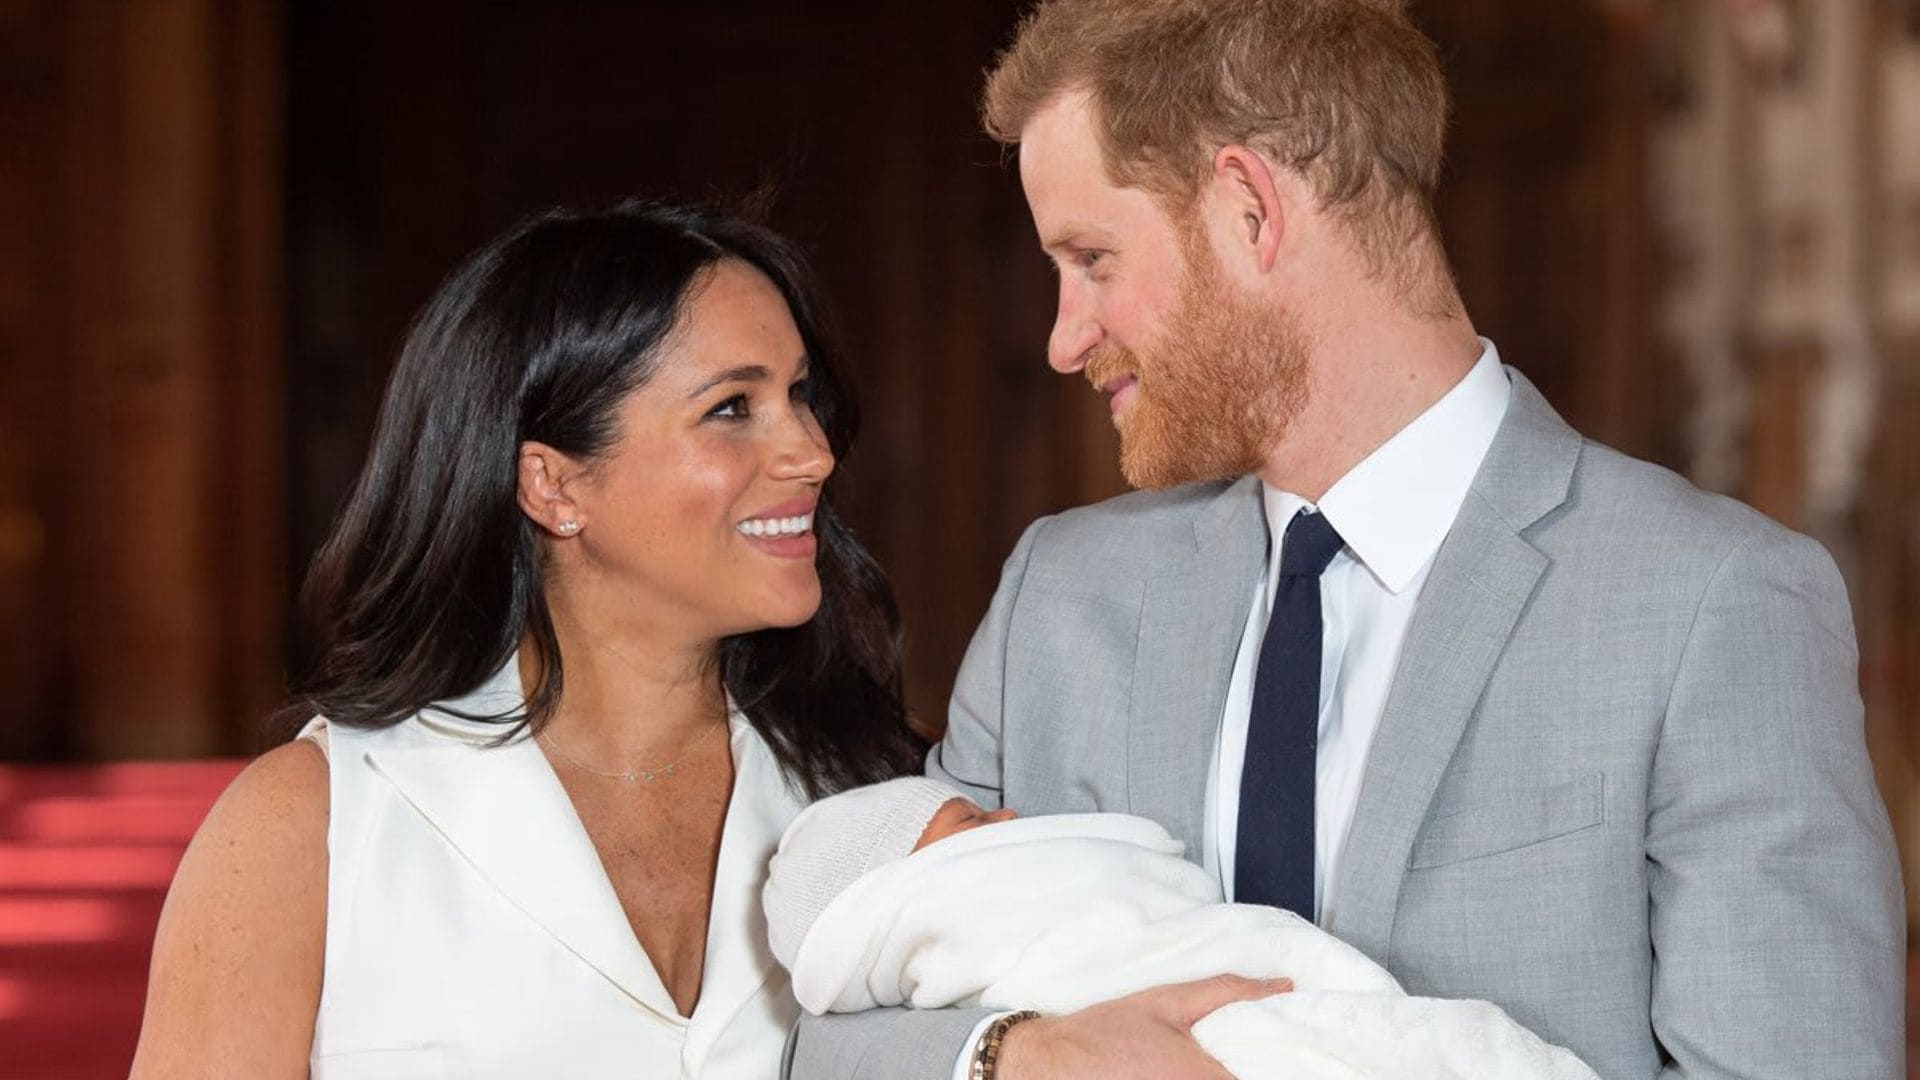 Do Meghan Markle and Prince Harry plan on having more kids after baby Lili?